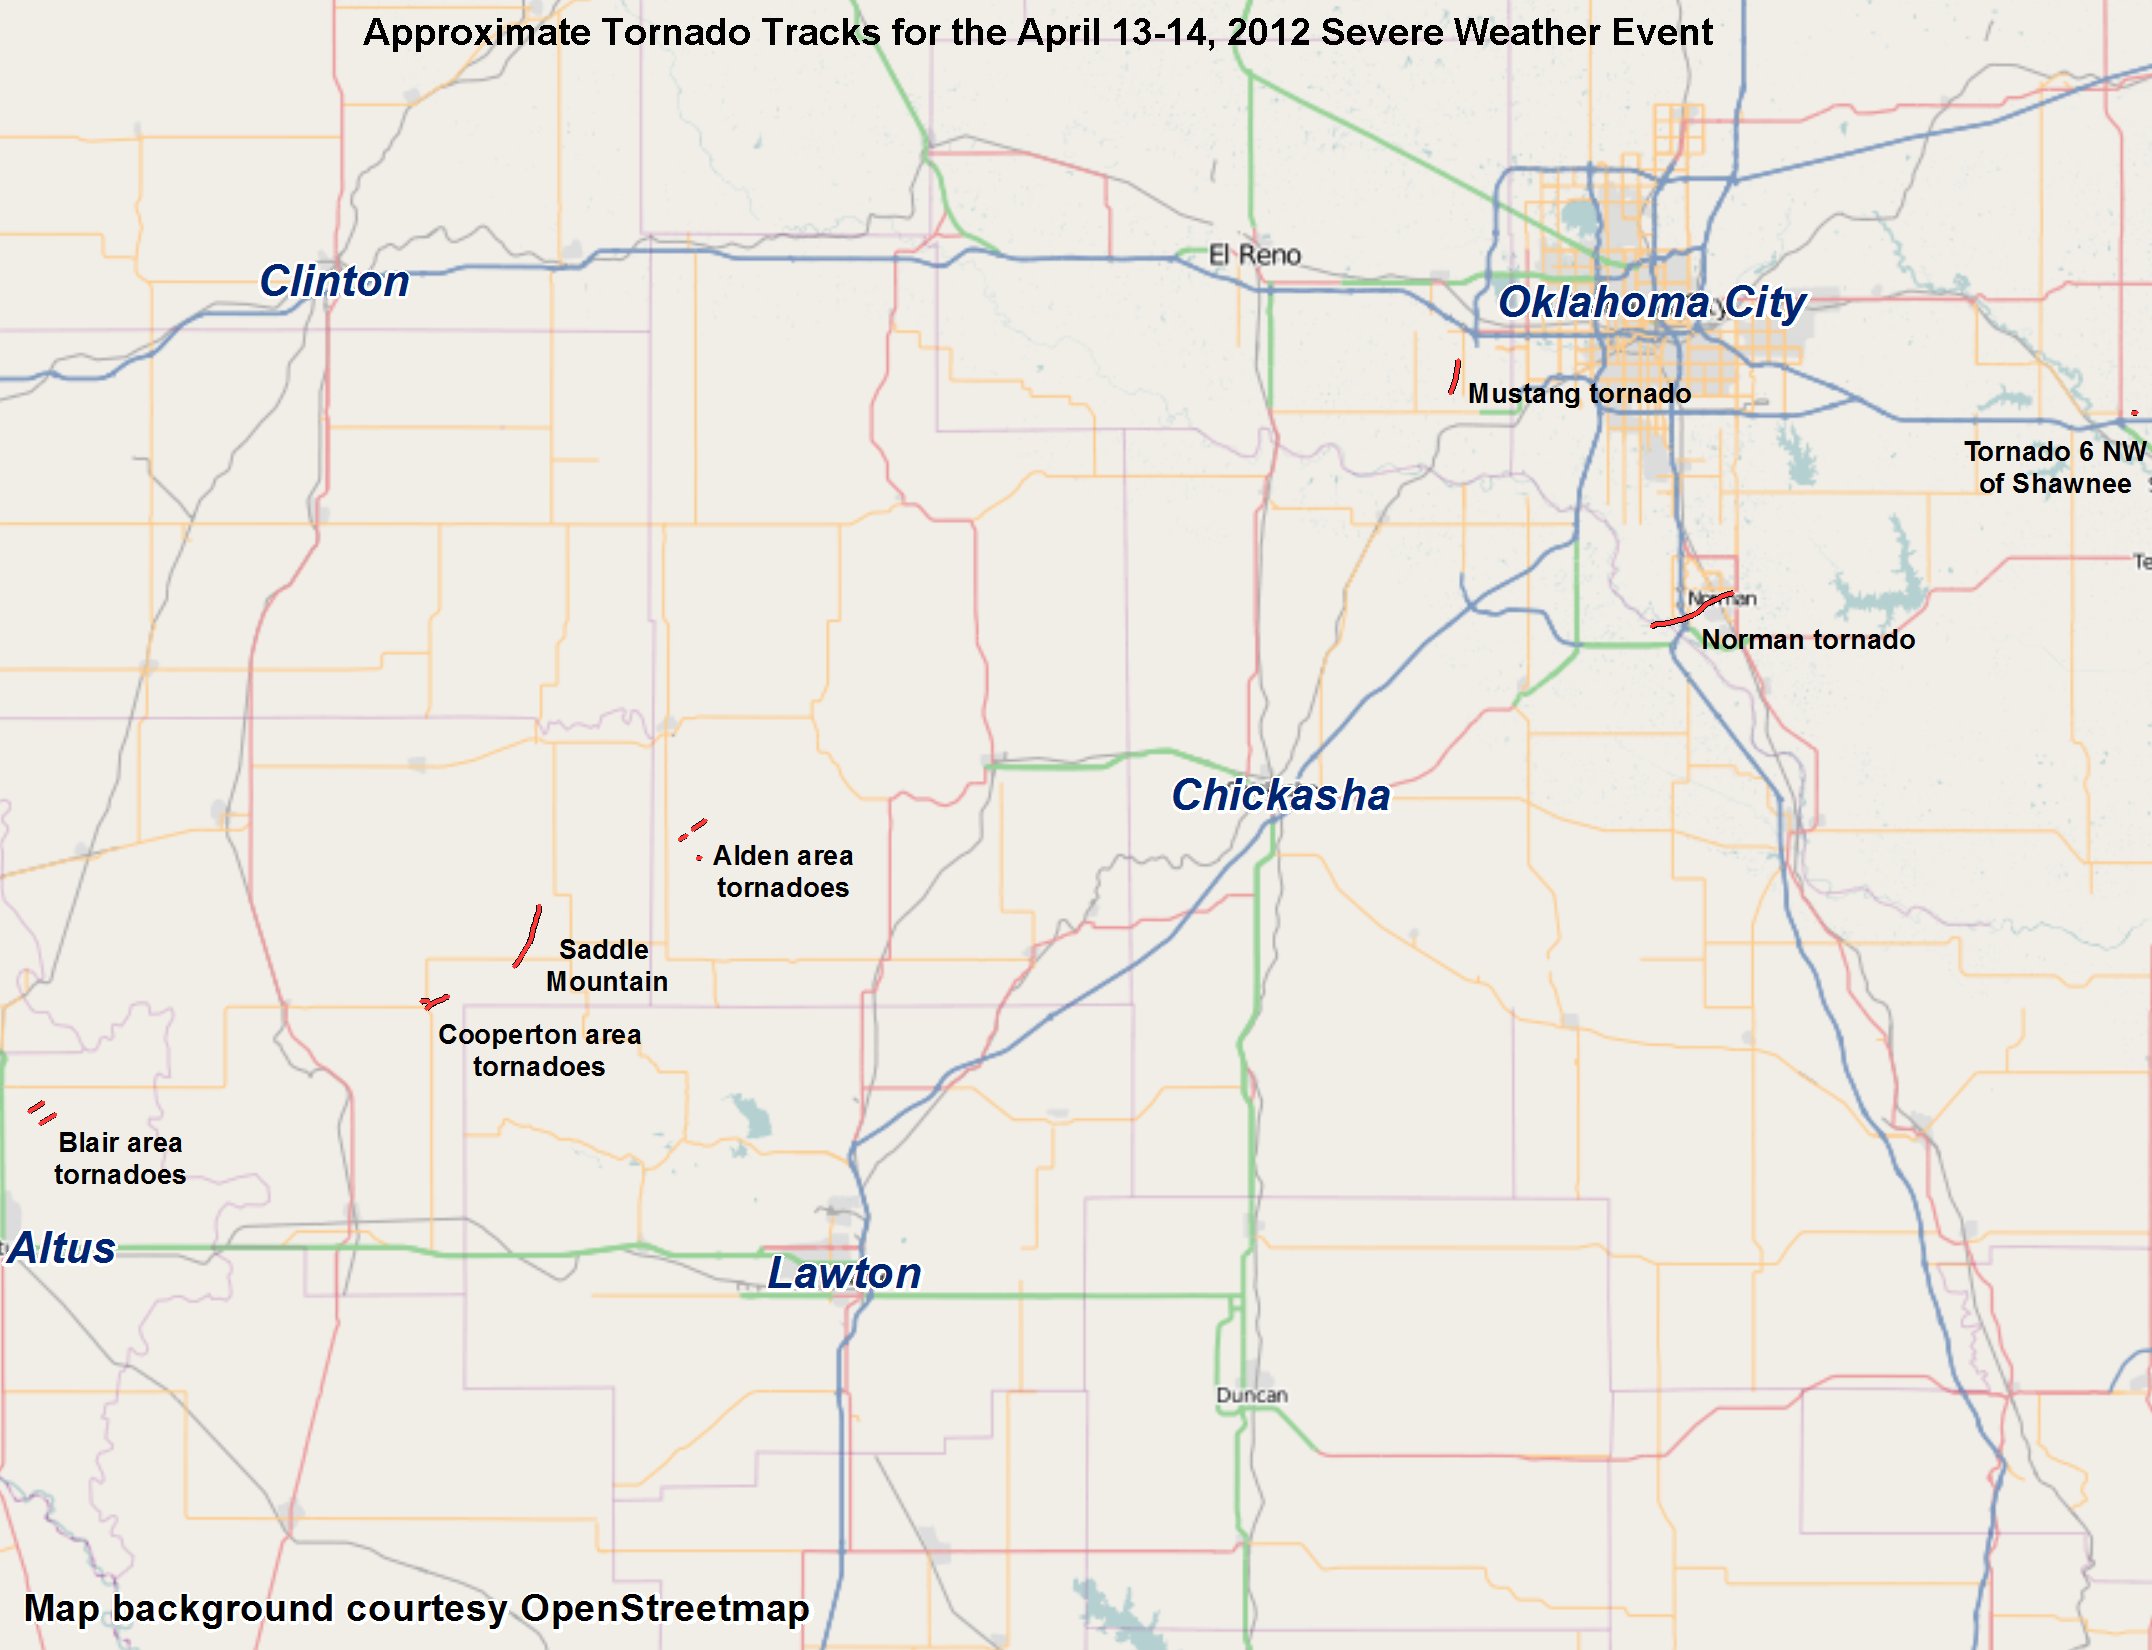 Map of the Approximate Tornado Tracks for the April 13-14, 2012 Severe Weather Event